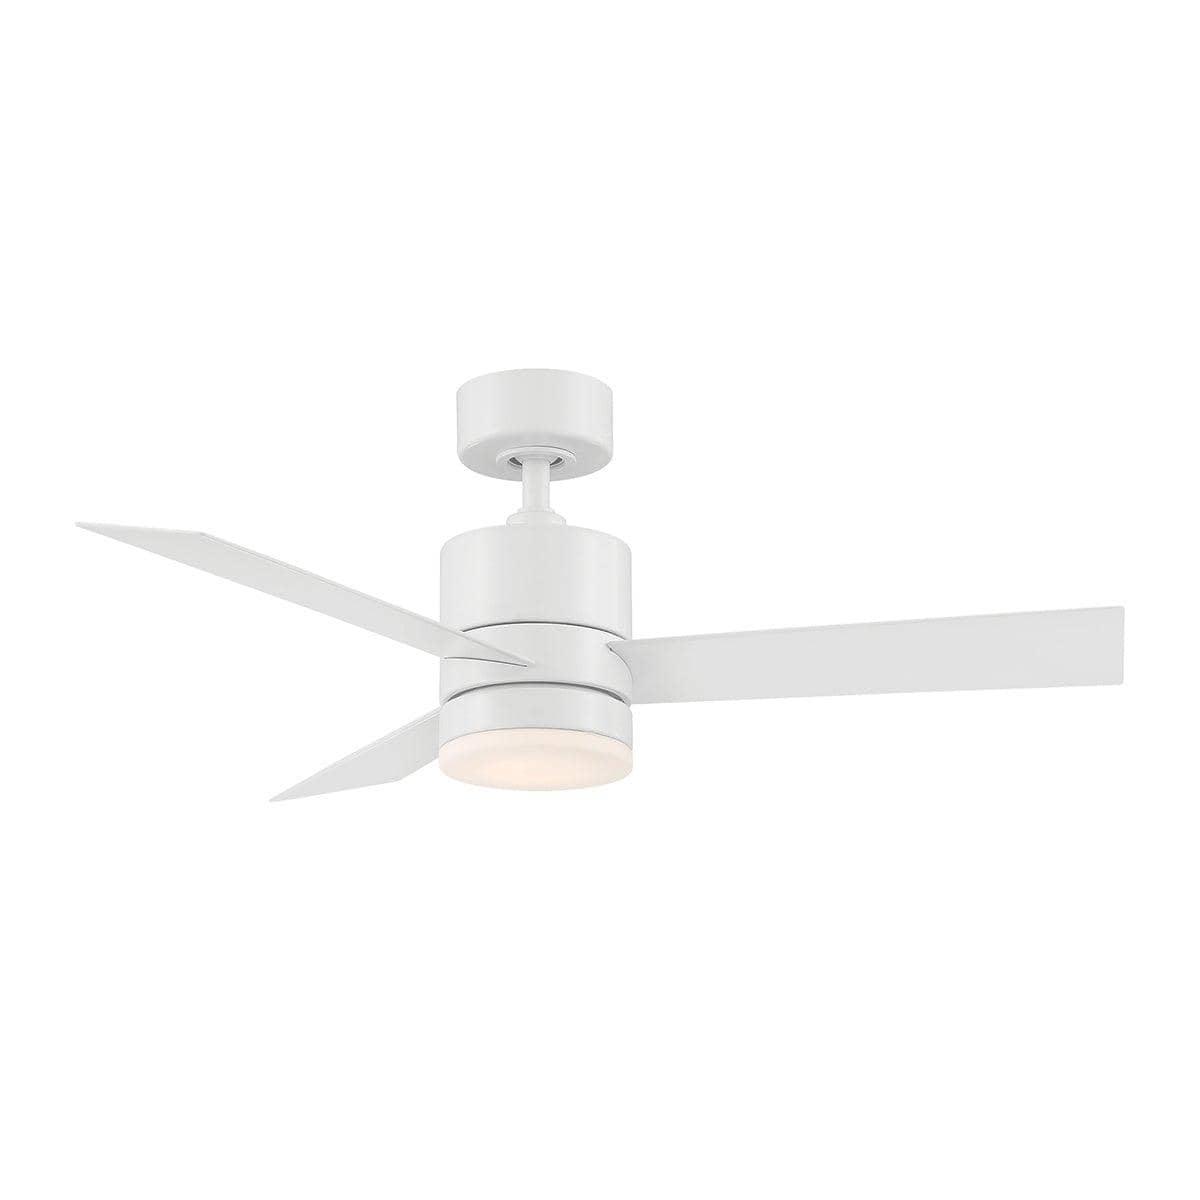 Modern Forms - Axis Ceiling Fan - FR-W1803-44L-MW | Montreal Lighting & Hardware